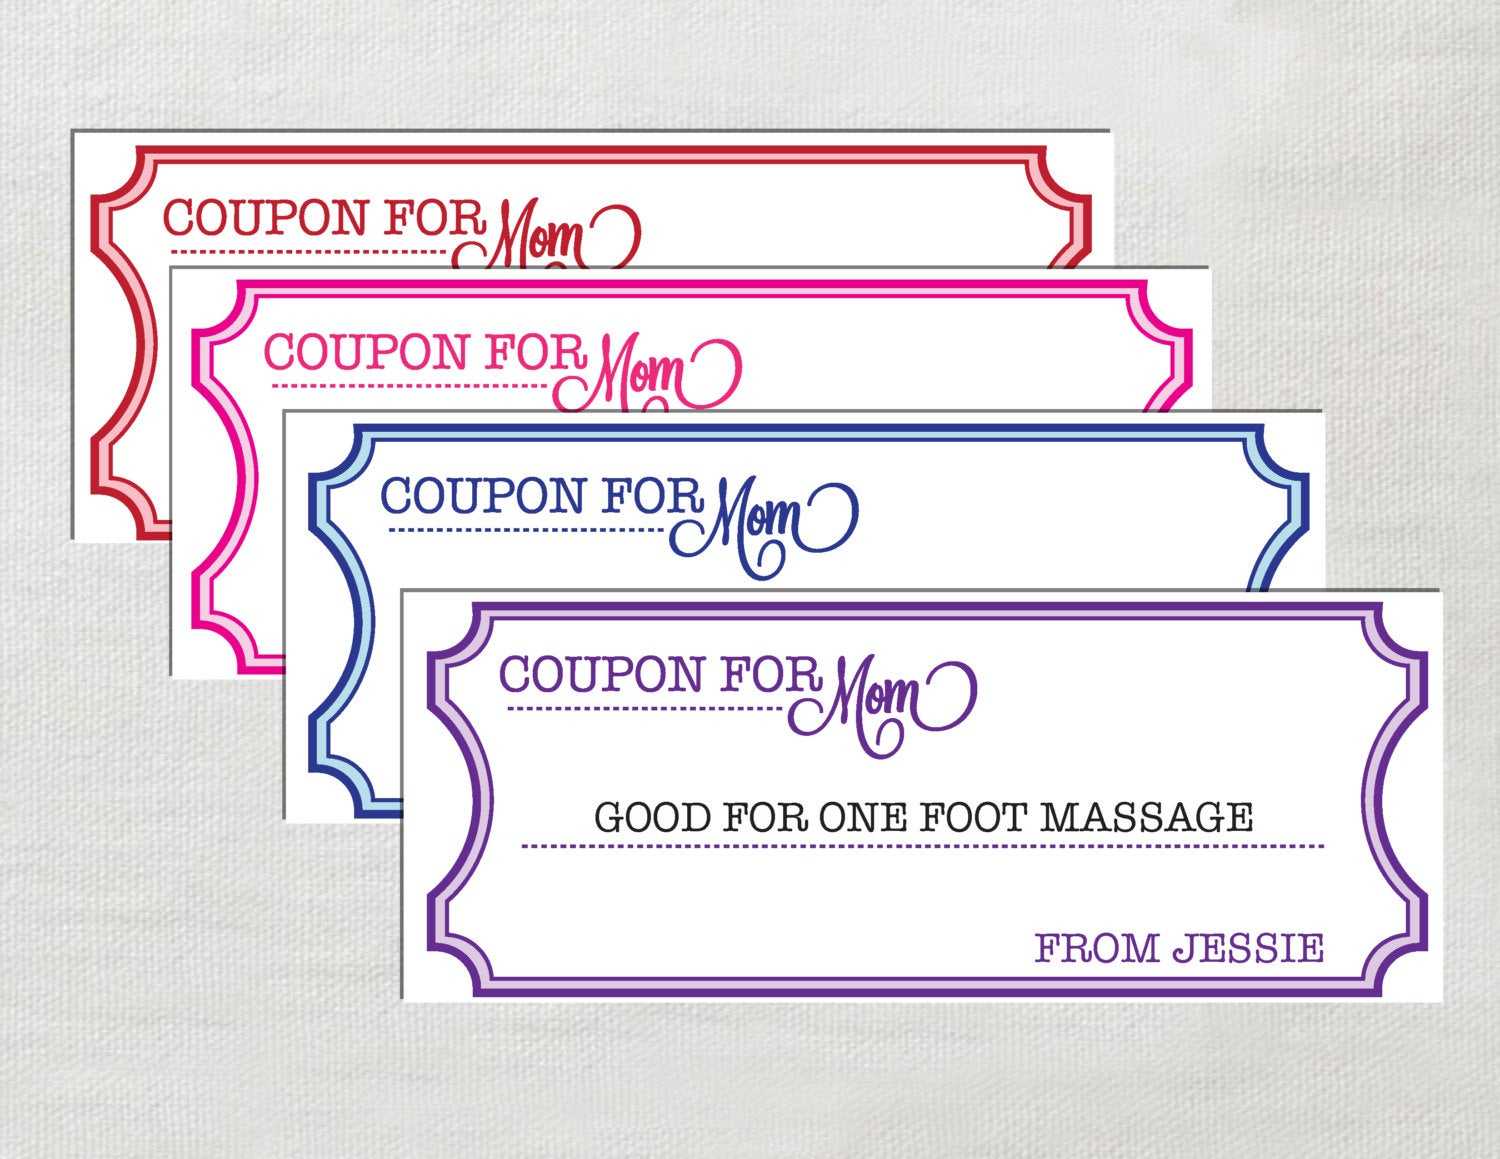 Coupon Template Free Word ] – Doc 585450 Coupon Template For Intended For Love Coupon Template For Word